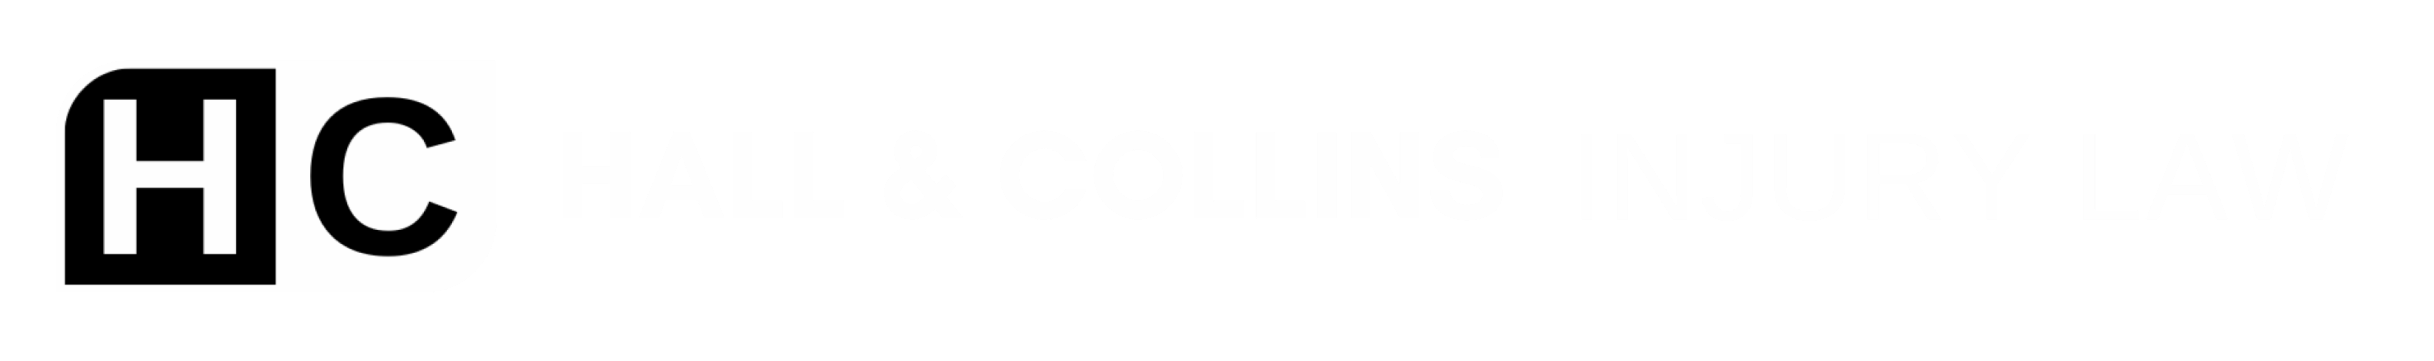 Hall & Collins Injury Law